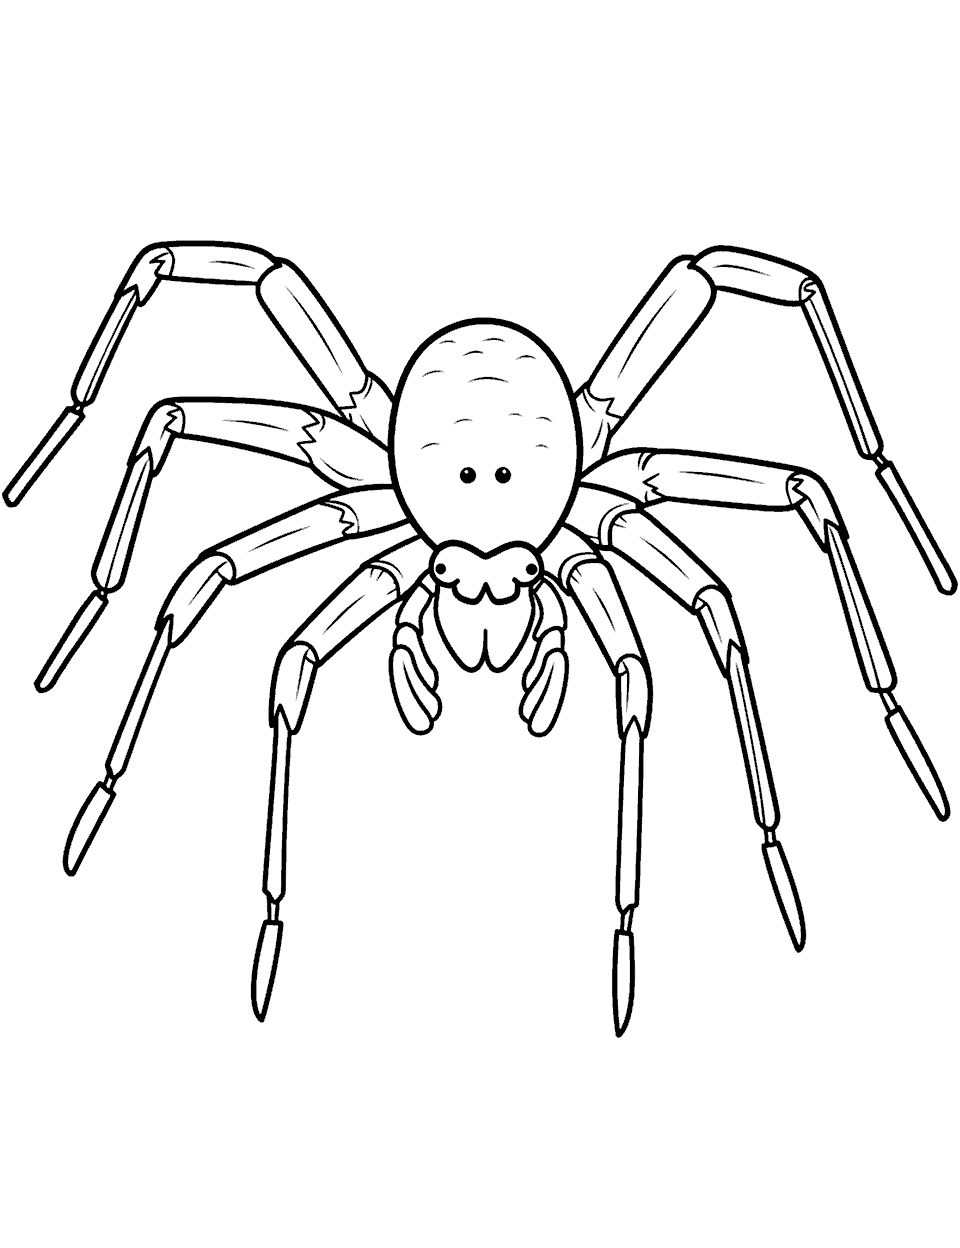 Spider Coloring Page Template - A basic spider outline serving as a coloring template.